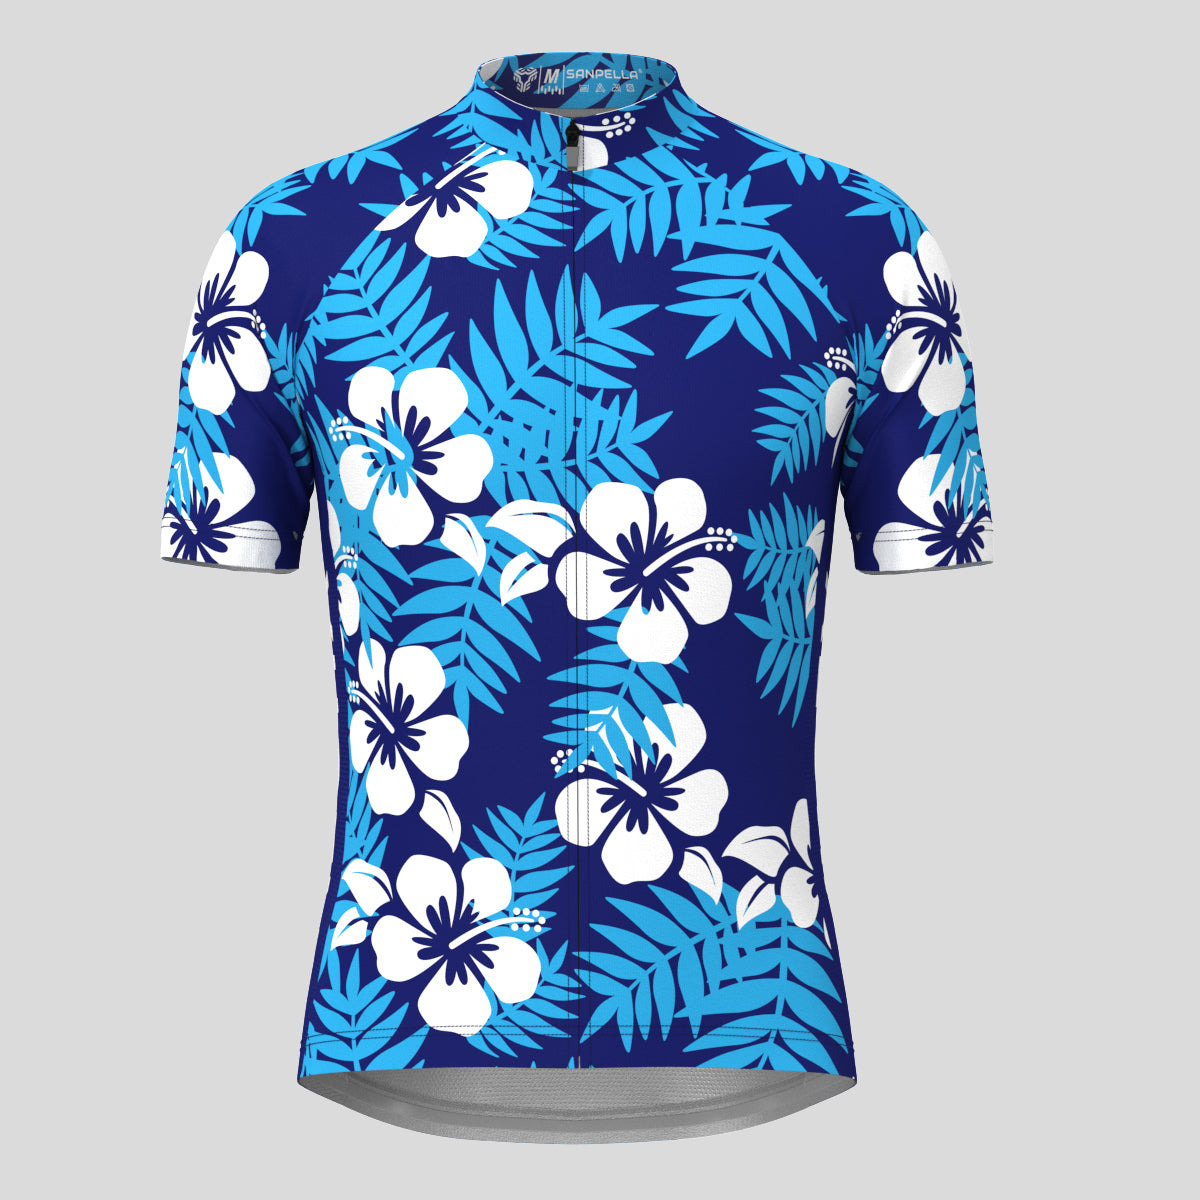 Classic Hawaii Floral Men's Cycling Jersey